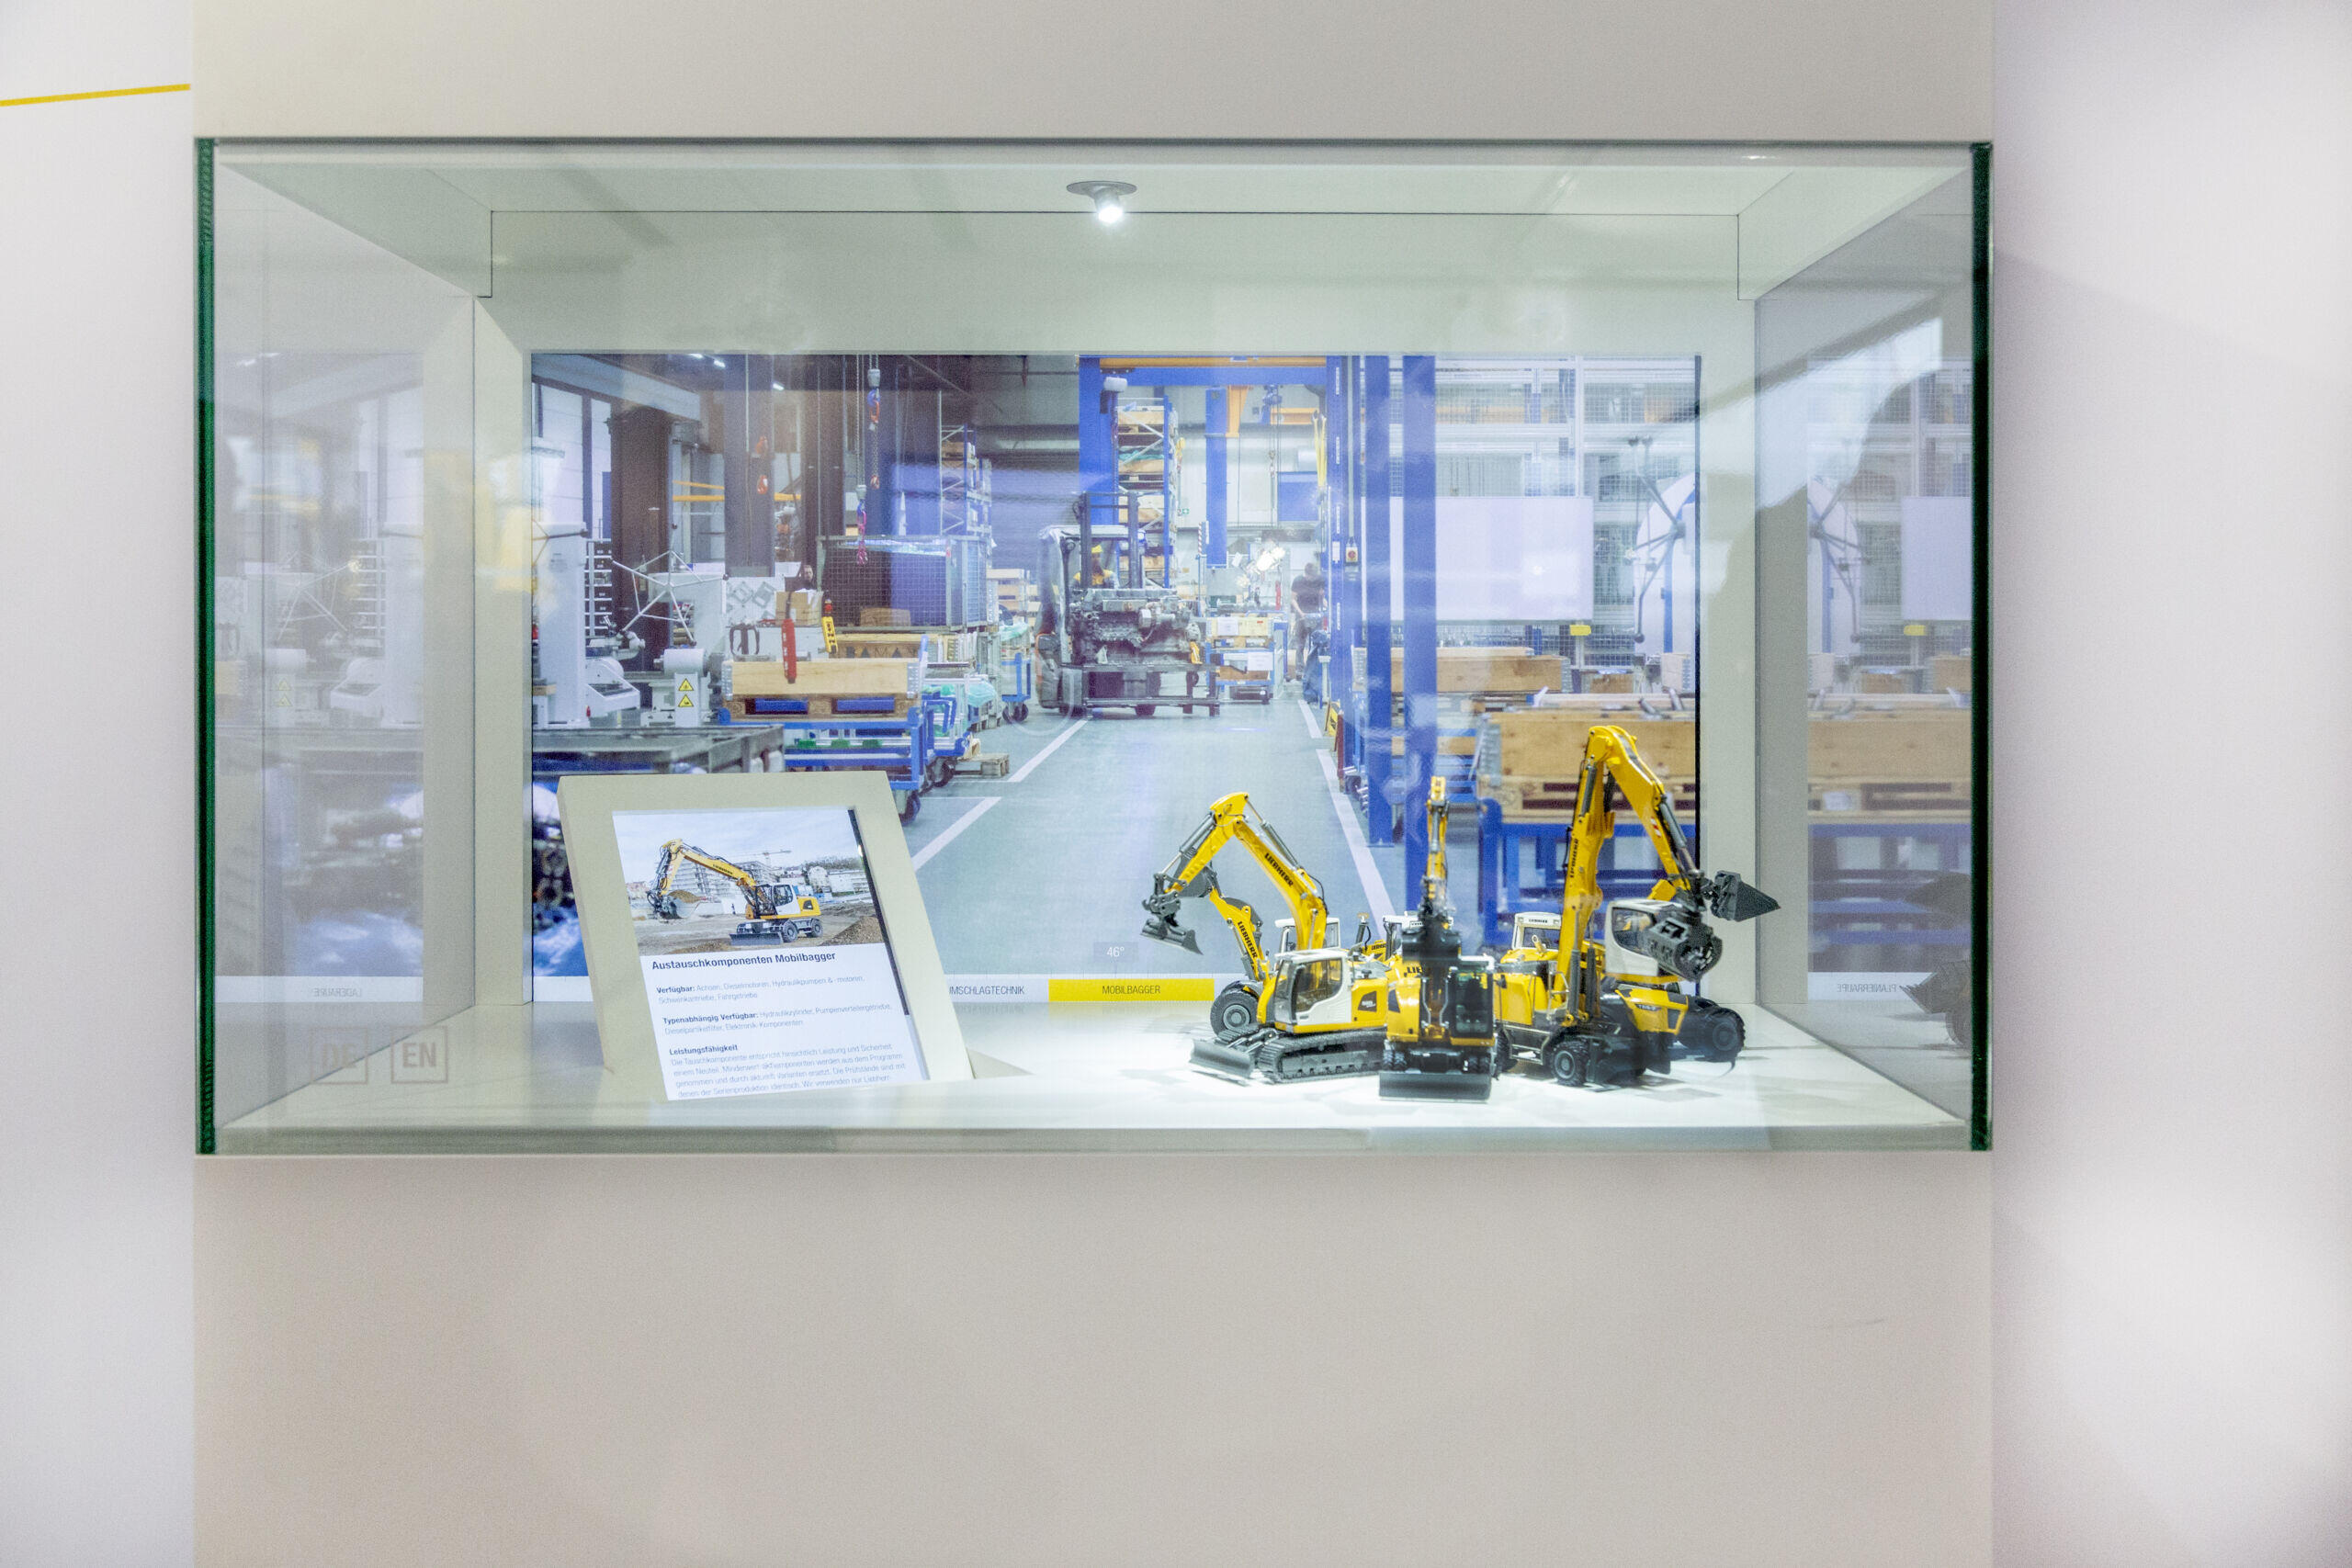 Select excavator by swiping gesture on the showcase glass and receive information on two monitors